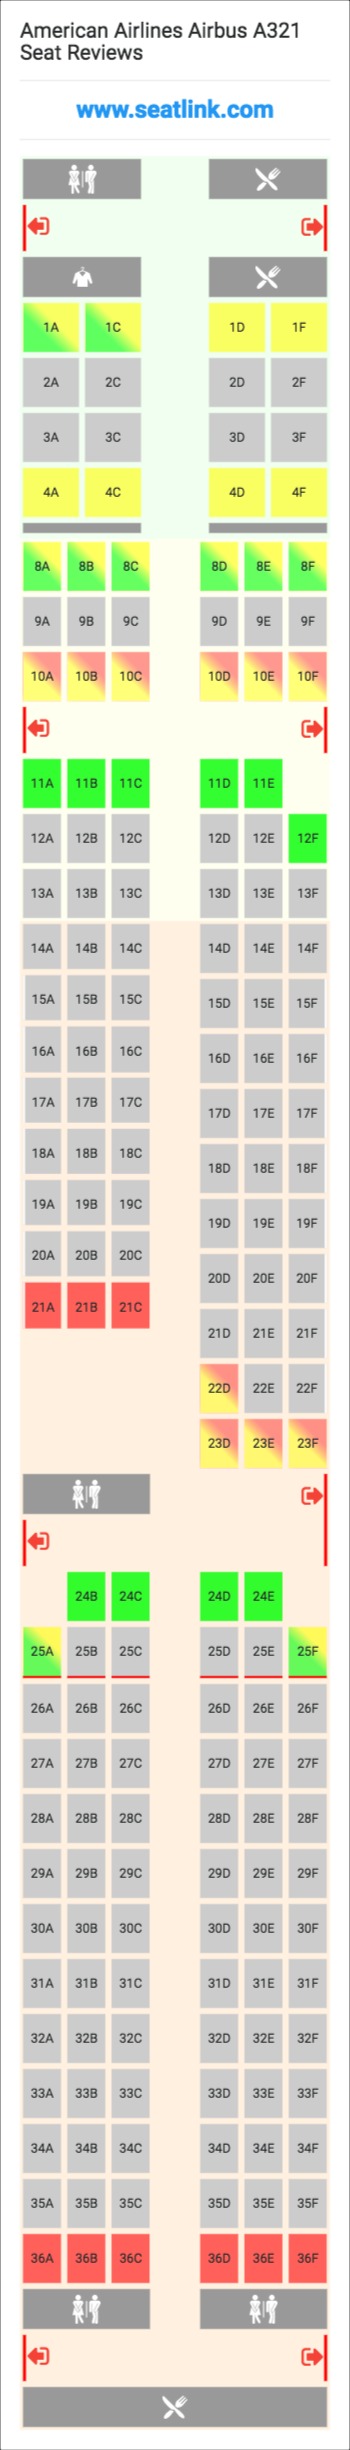 American Airlines Airbus A321 Seating Chart Updated